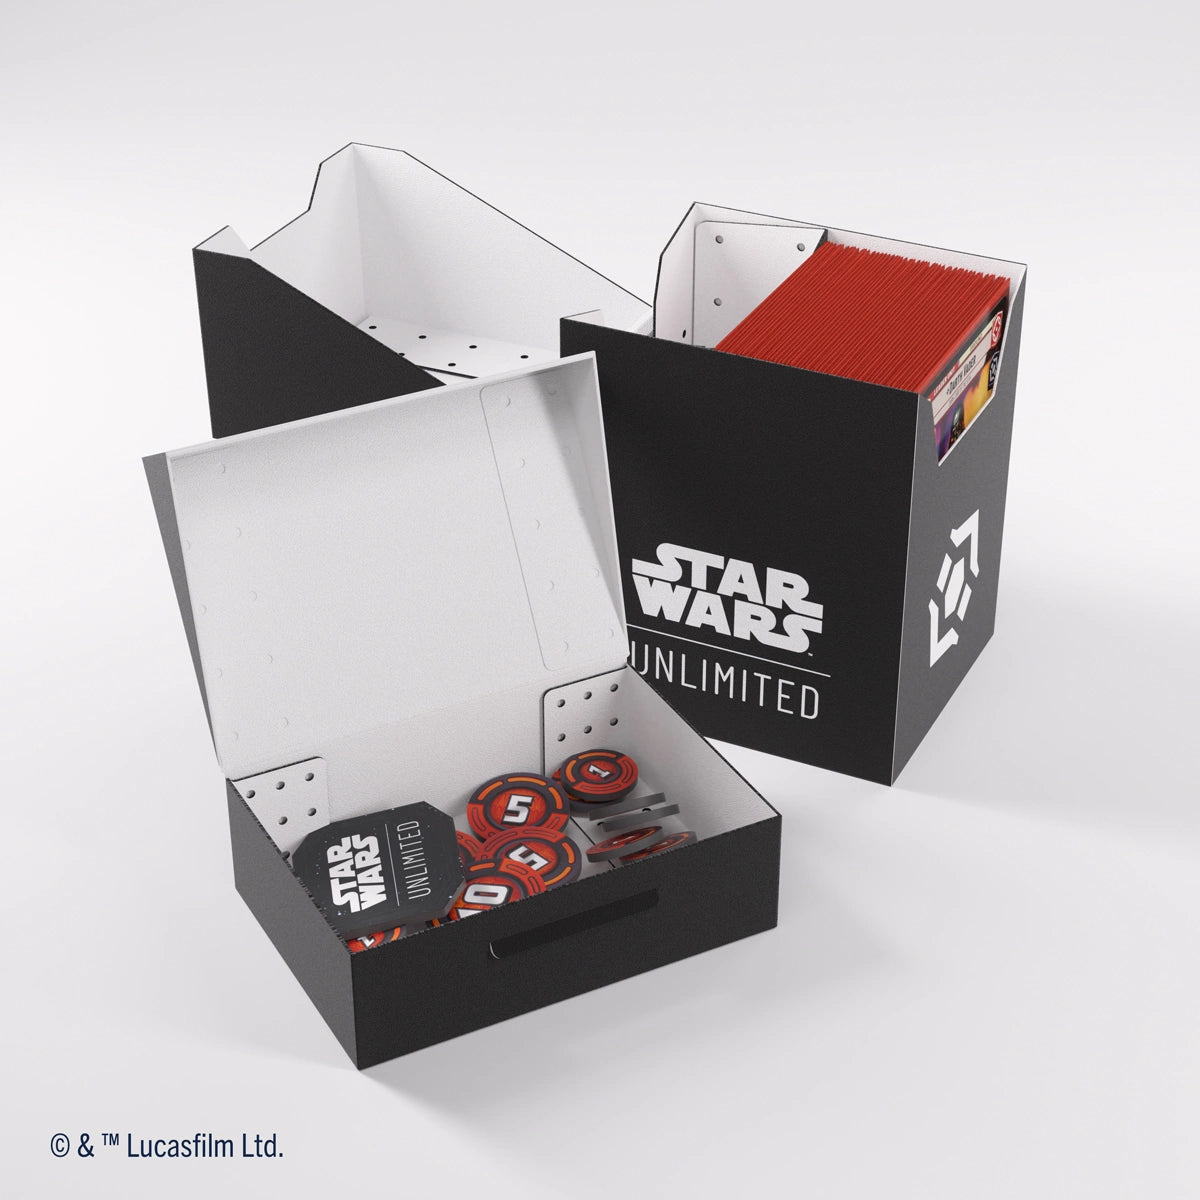 Star Wars: Unlimited Soft Crate - Black